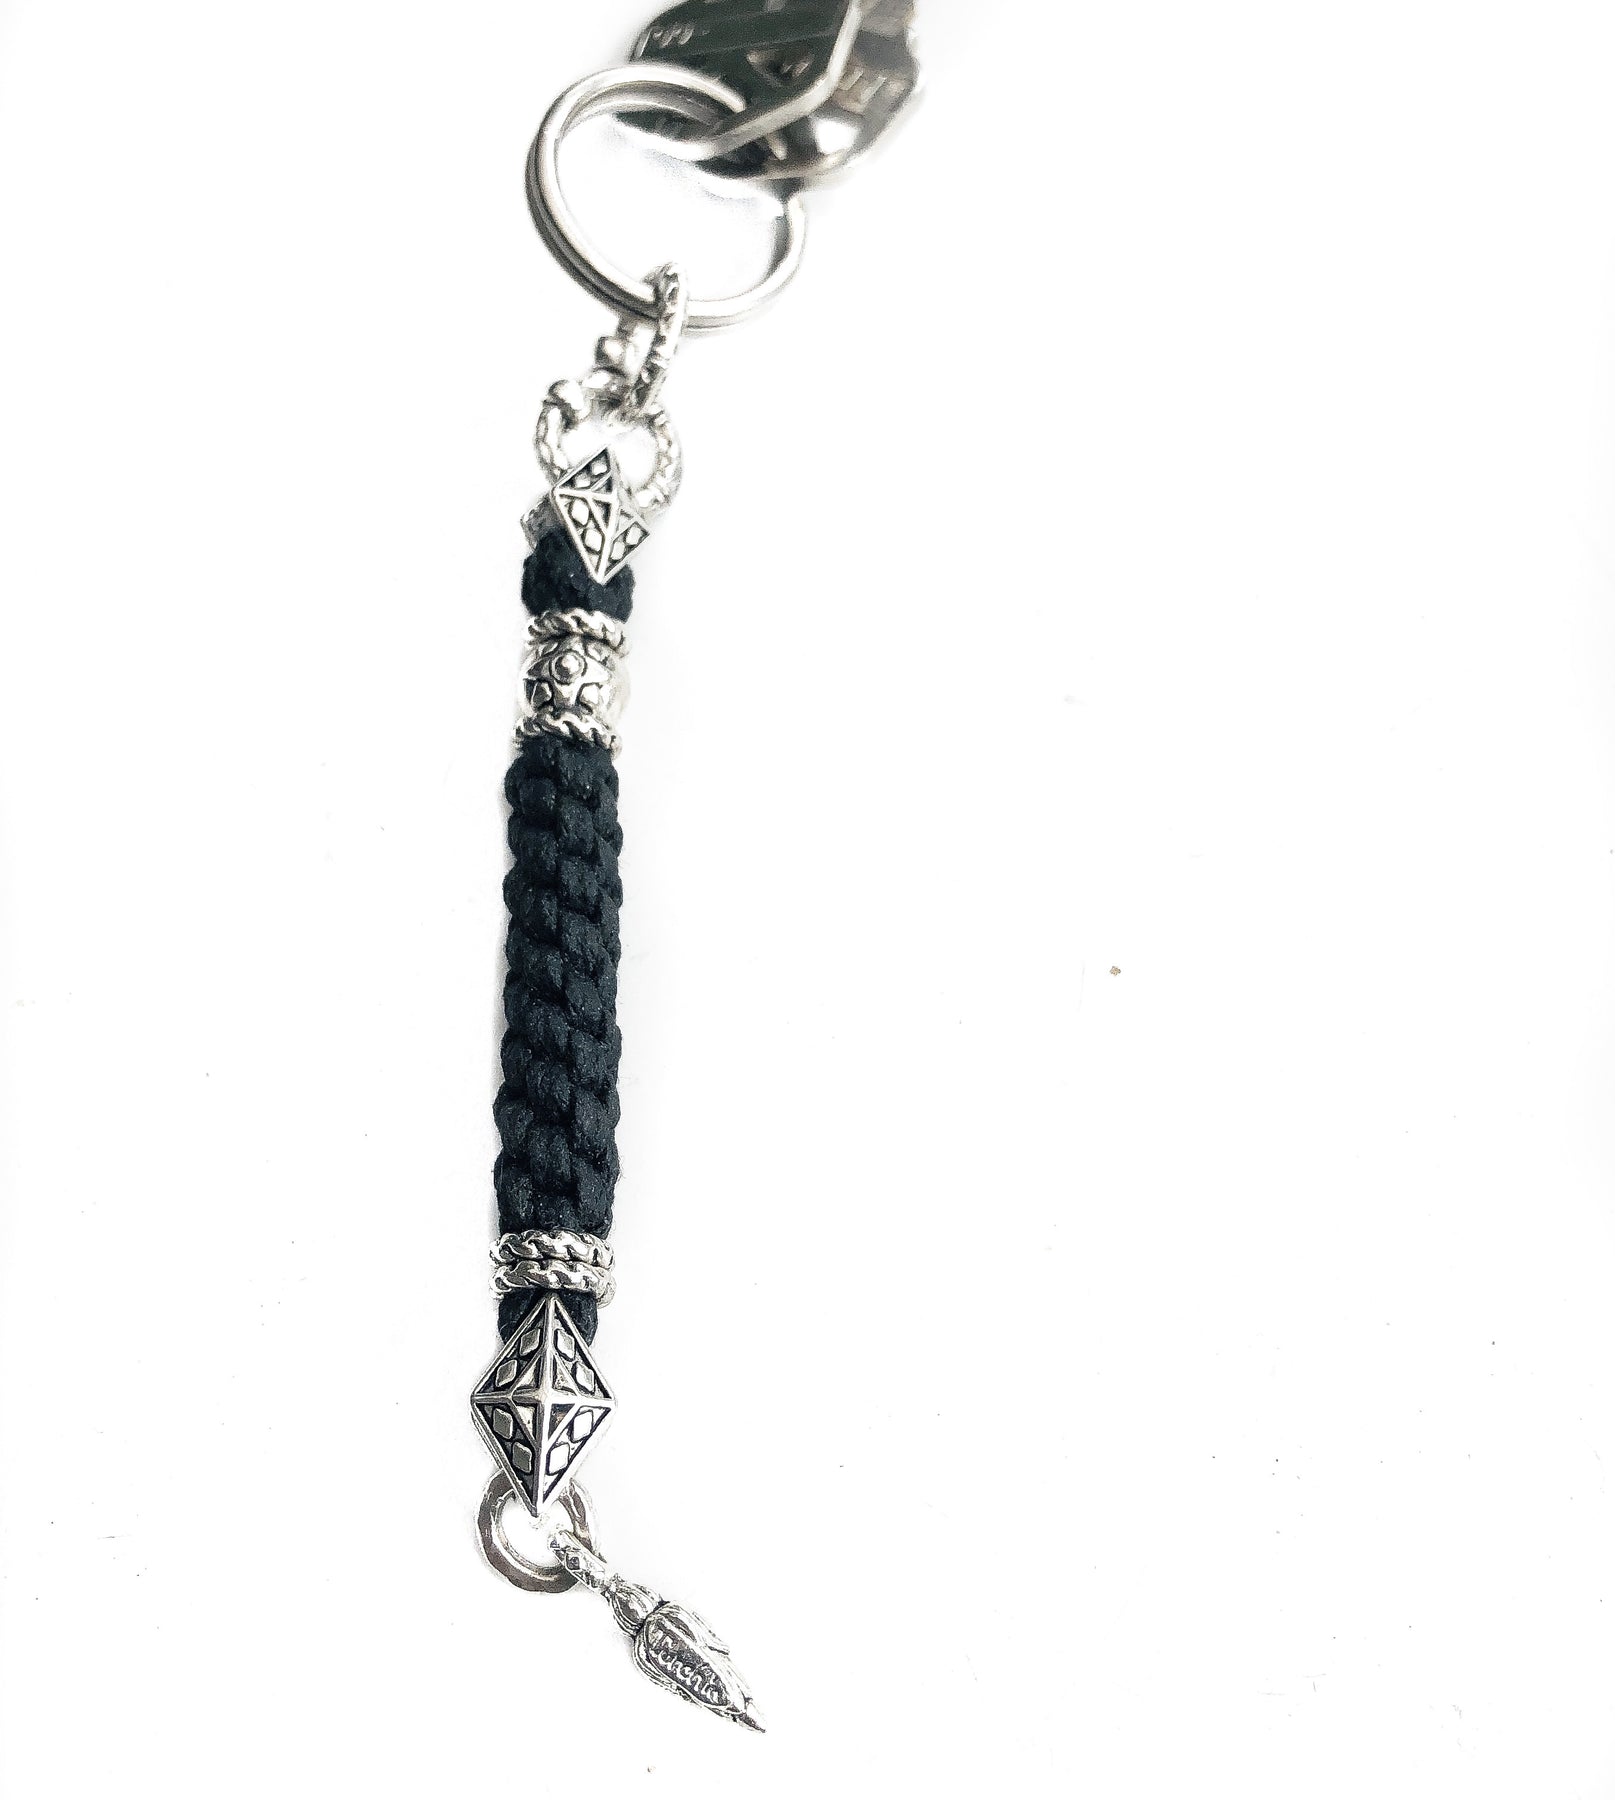 Wallet Chains or Keychains - Silvertraits